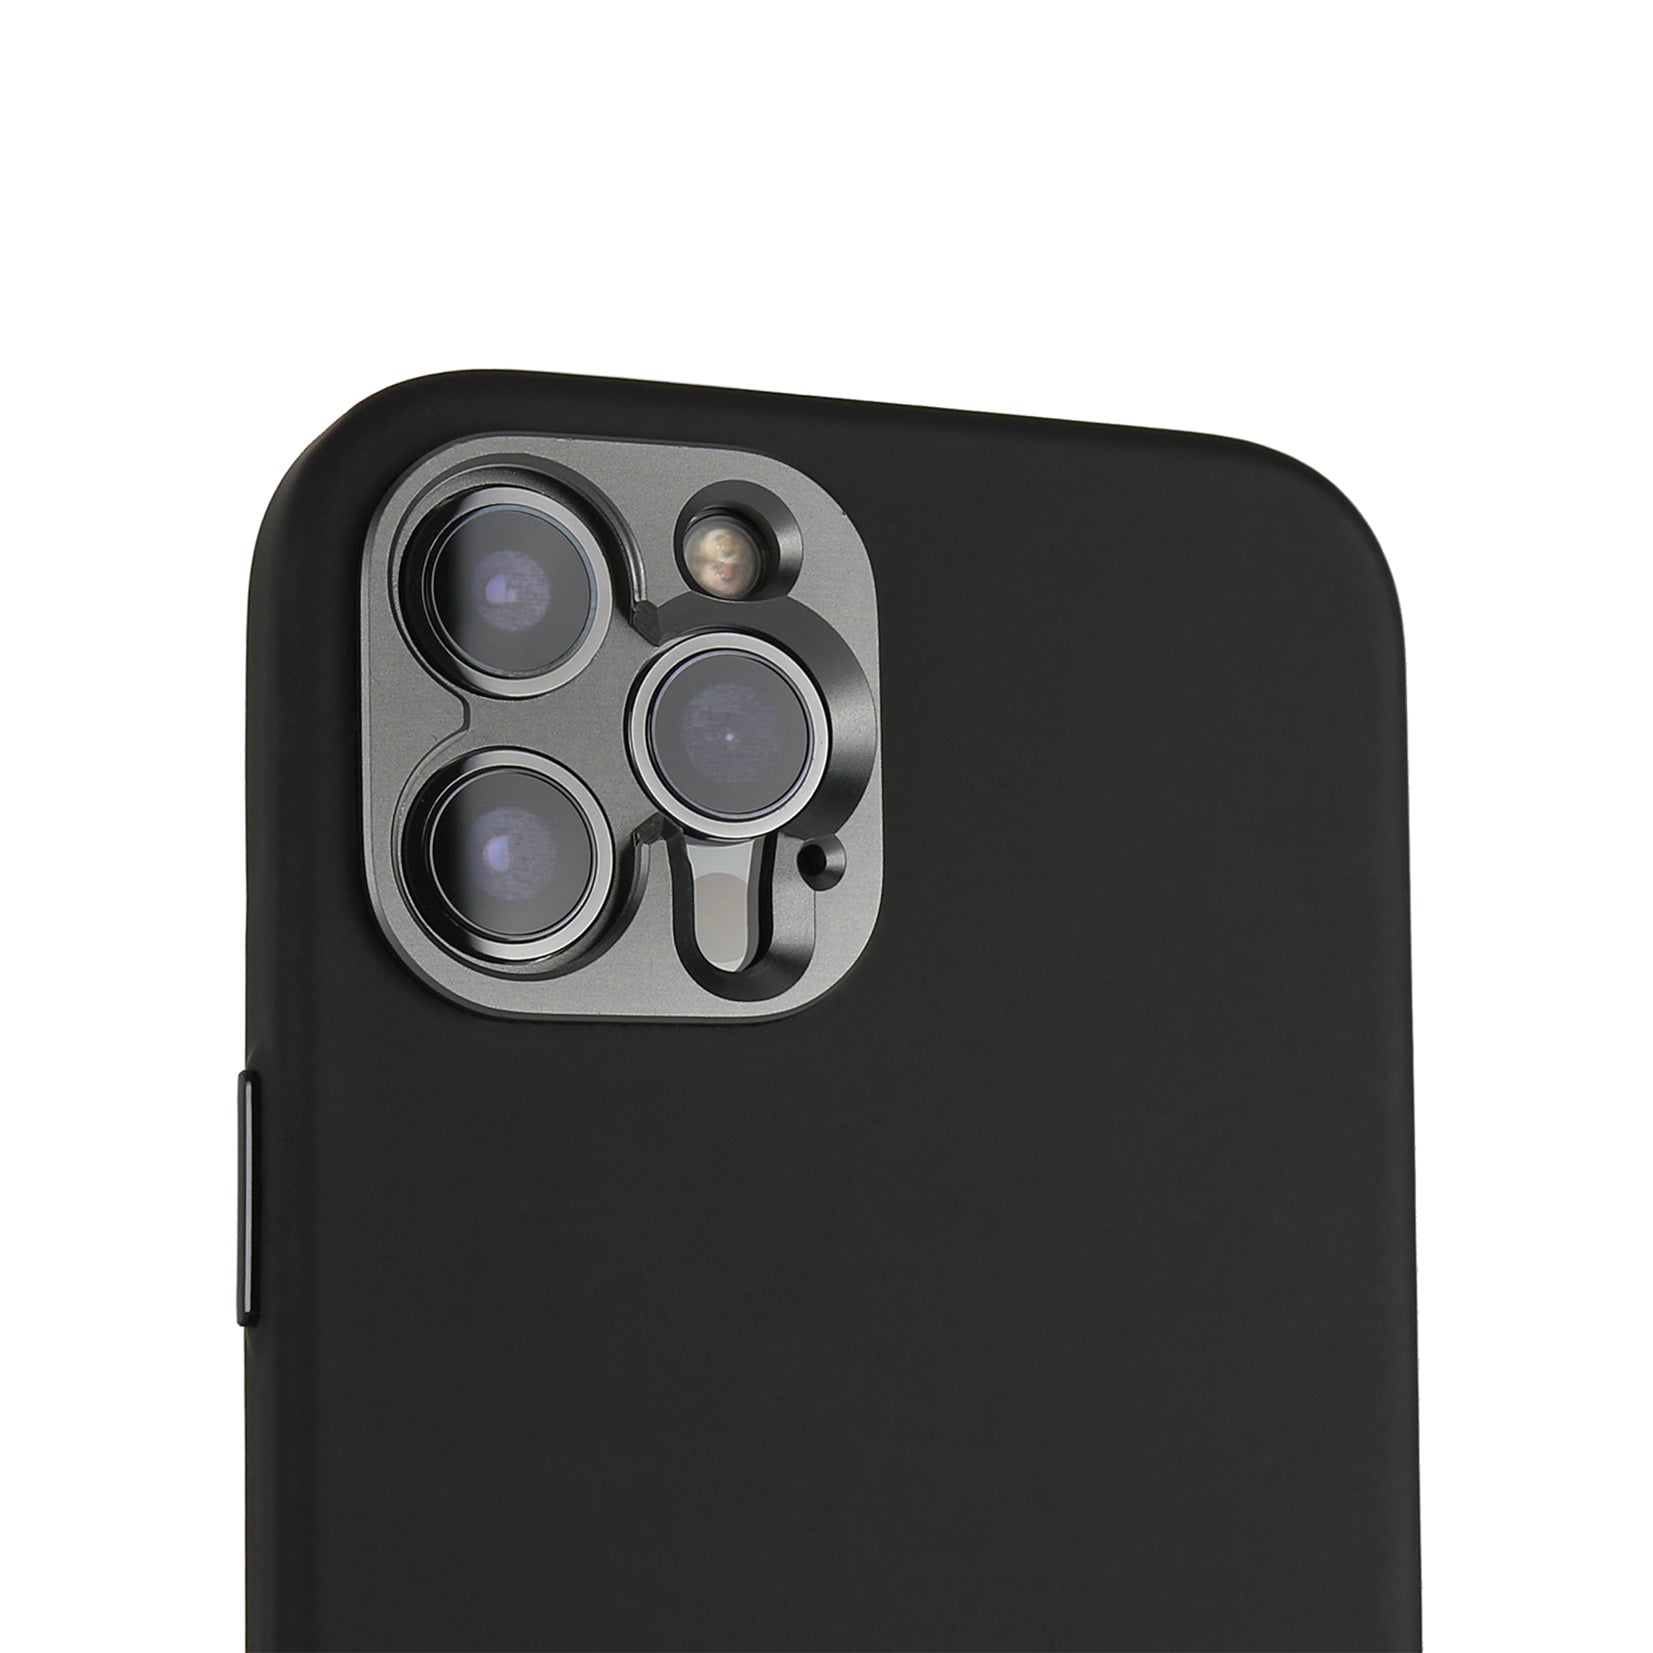 Pro Case - iPhone 13 Pro (MagSafe Compatible)